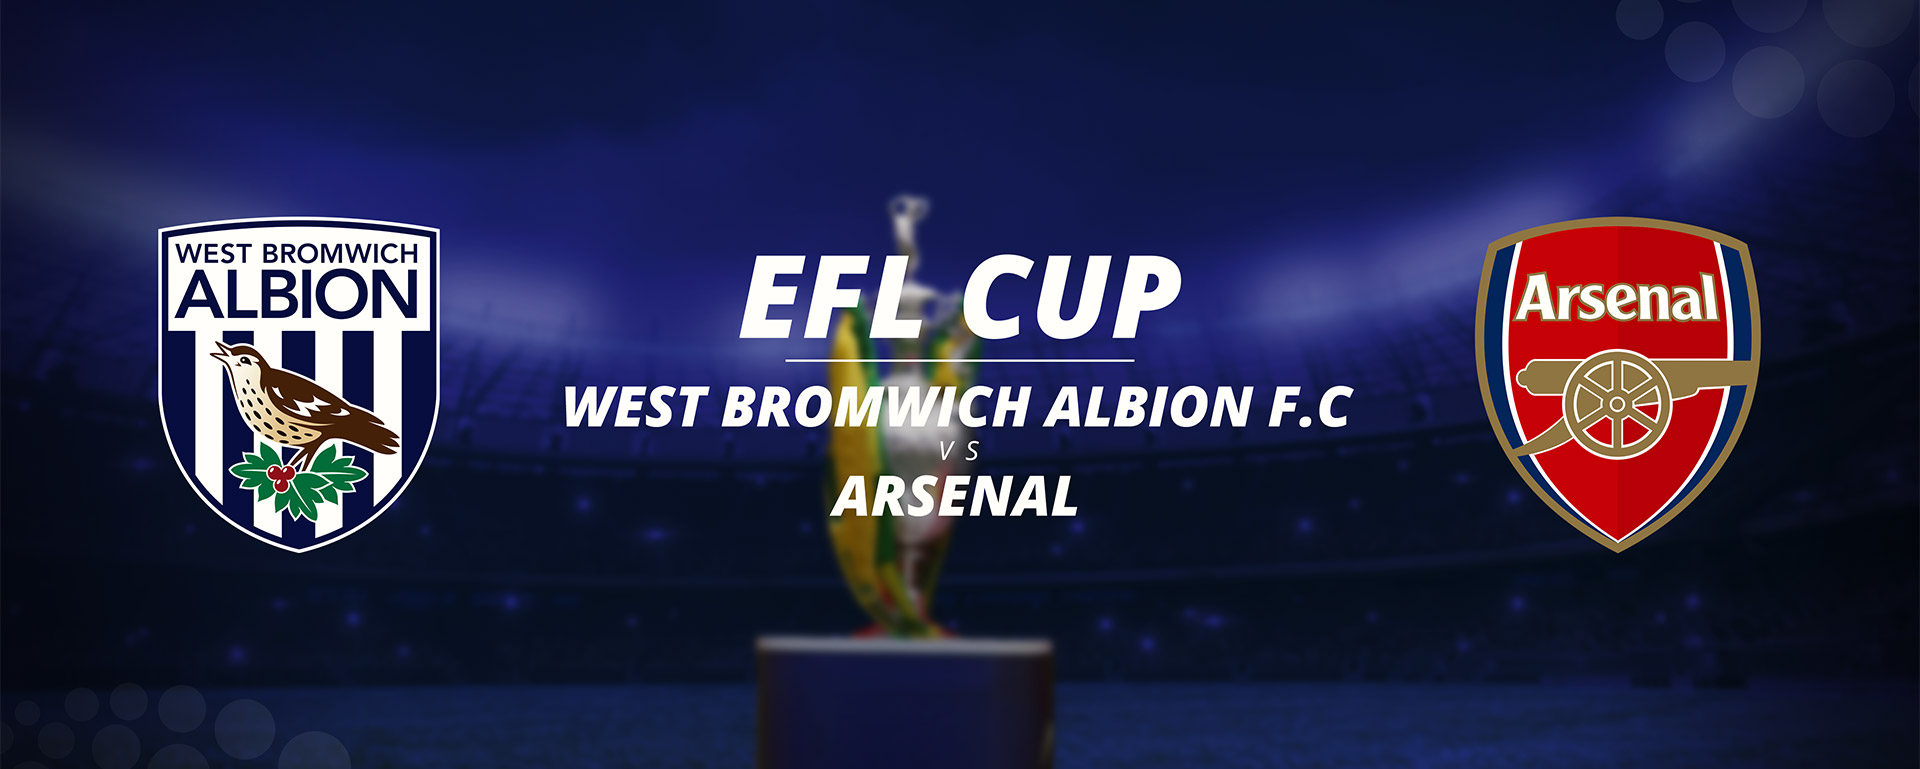 WEST BROMWICH ALBION VS ARSENAL: BETTING PREVIEW